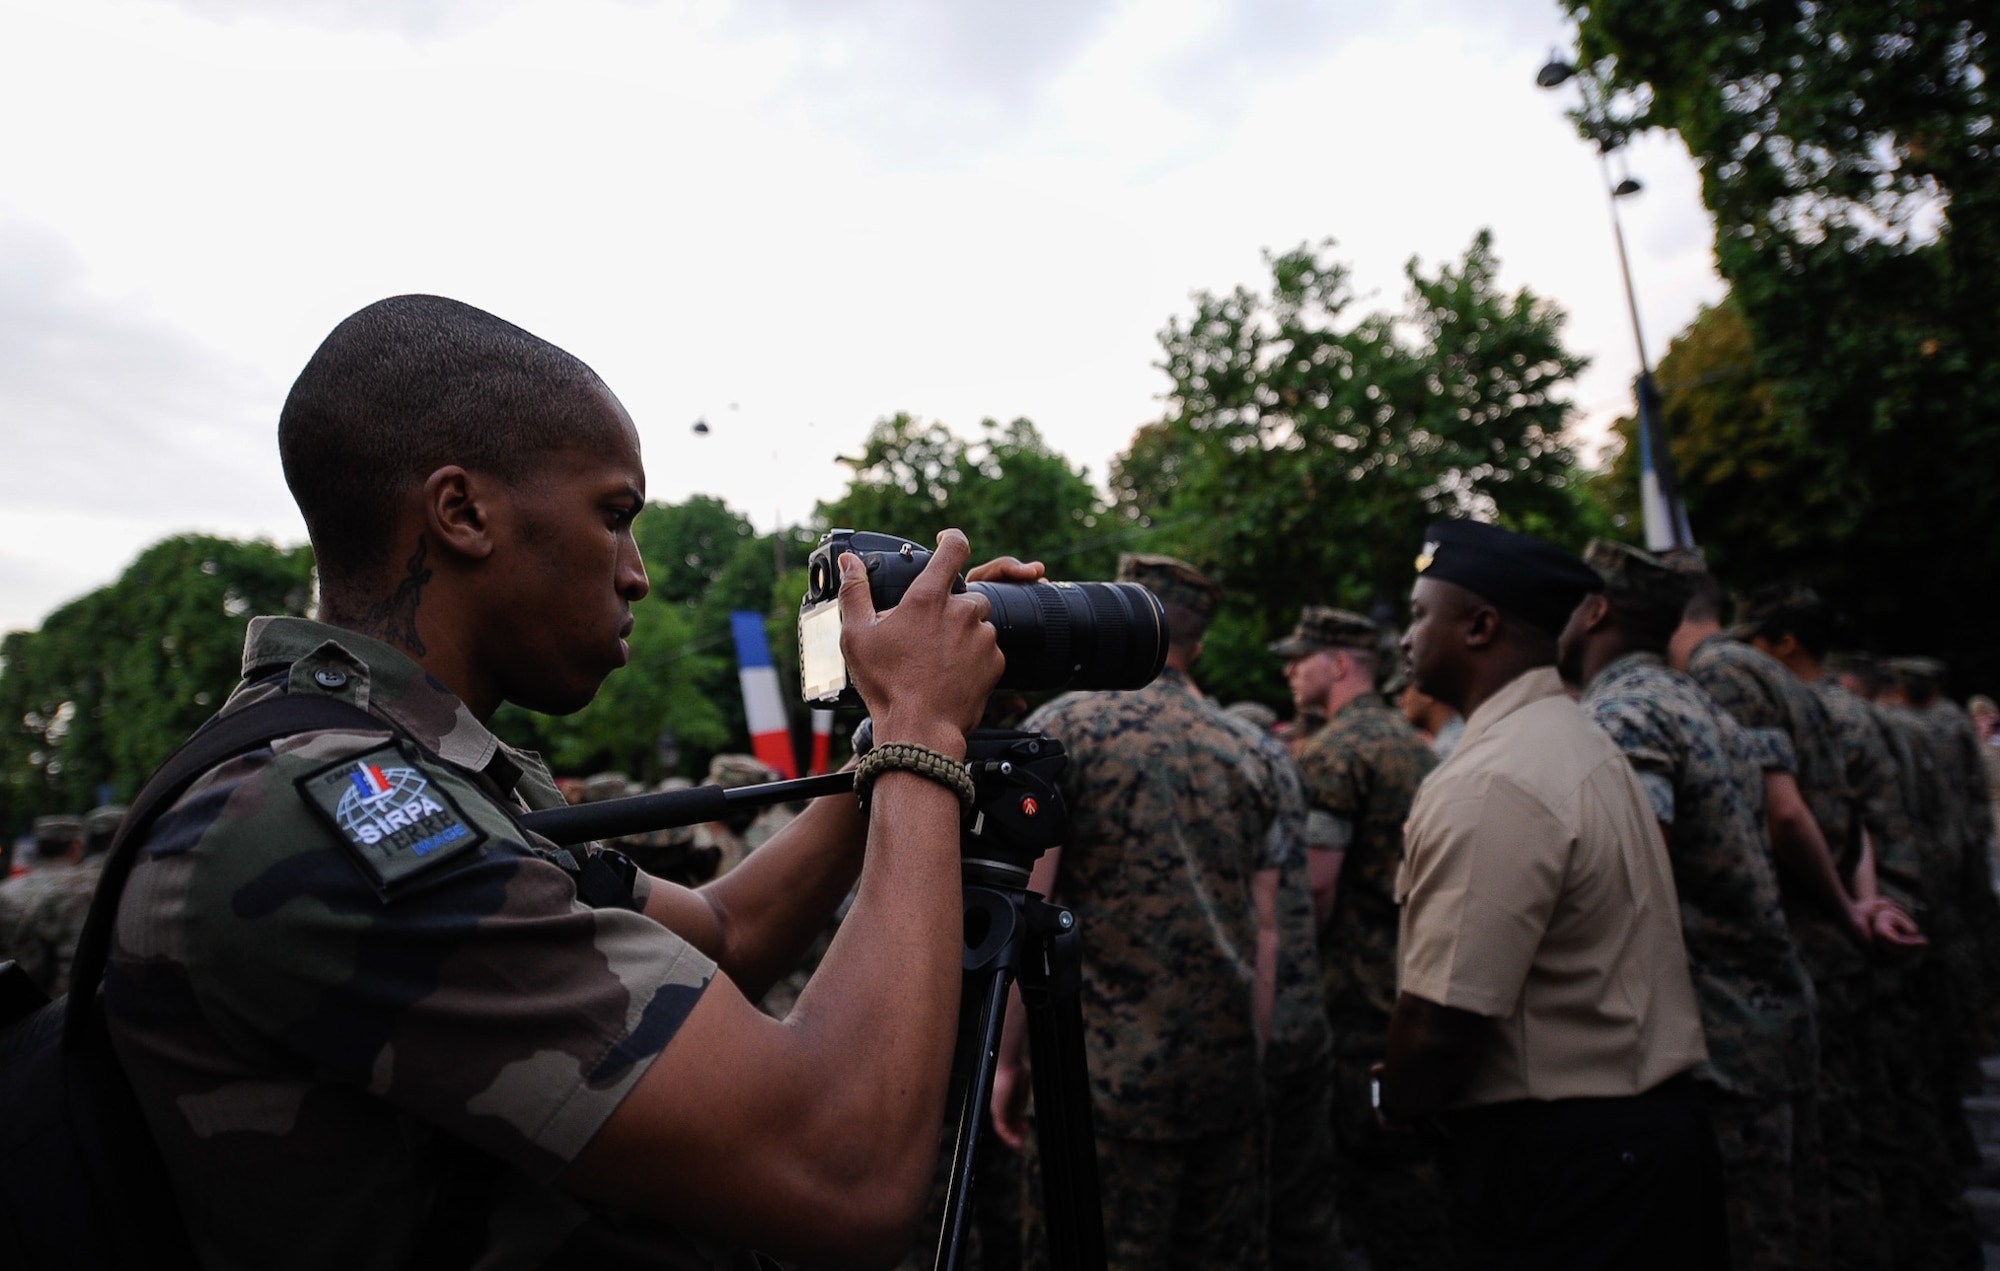 An Armée de Terre photographer takes photos of U.S. military members during a Bastille Day military parade rehearsal at the Avenue des Champs-Élysées, France, July 10, 2017. More than 200 U.S. service members led the Bastille Day military parade on July 14, 2017, to commemorate the 100 year anniversary of the U.S. entering World War I and joining the allied forces. (U.S. Air Force photo by Airman 1st Class Savannah L. Waters)